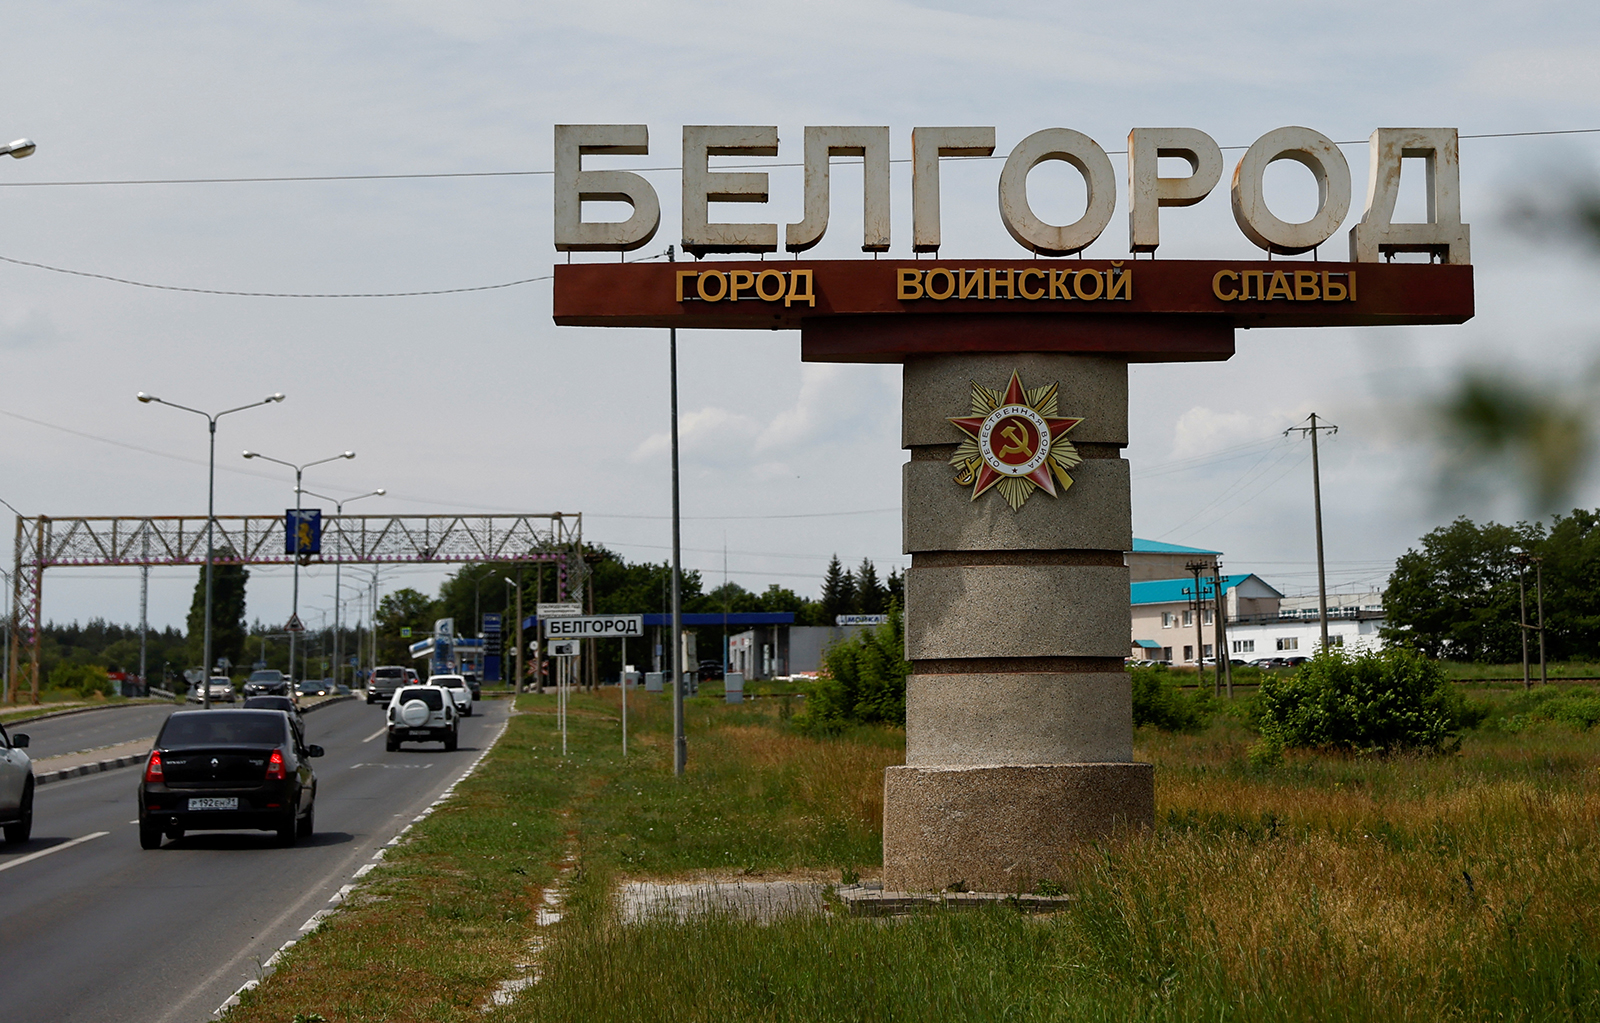 Cars drive past a stele displaying the city name in Belgorod, Russia, on June 8.